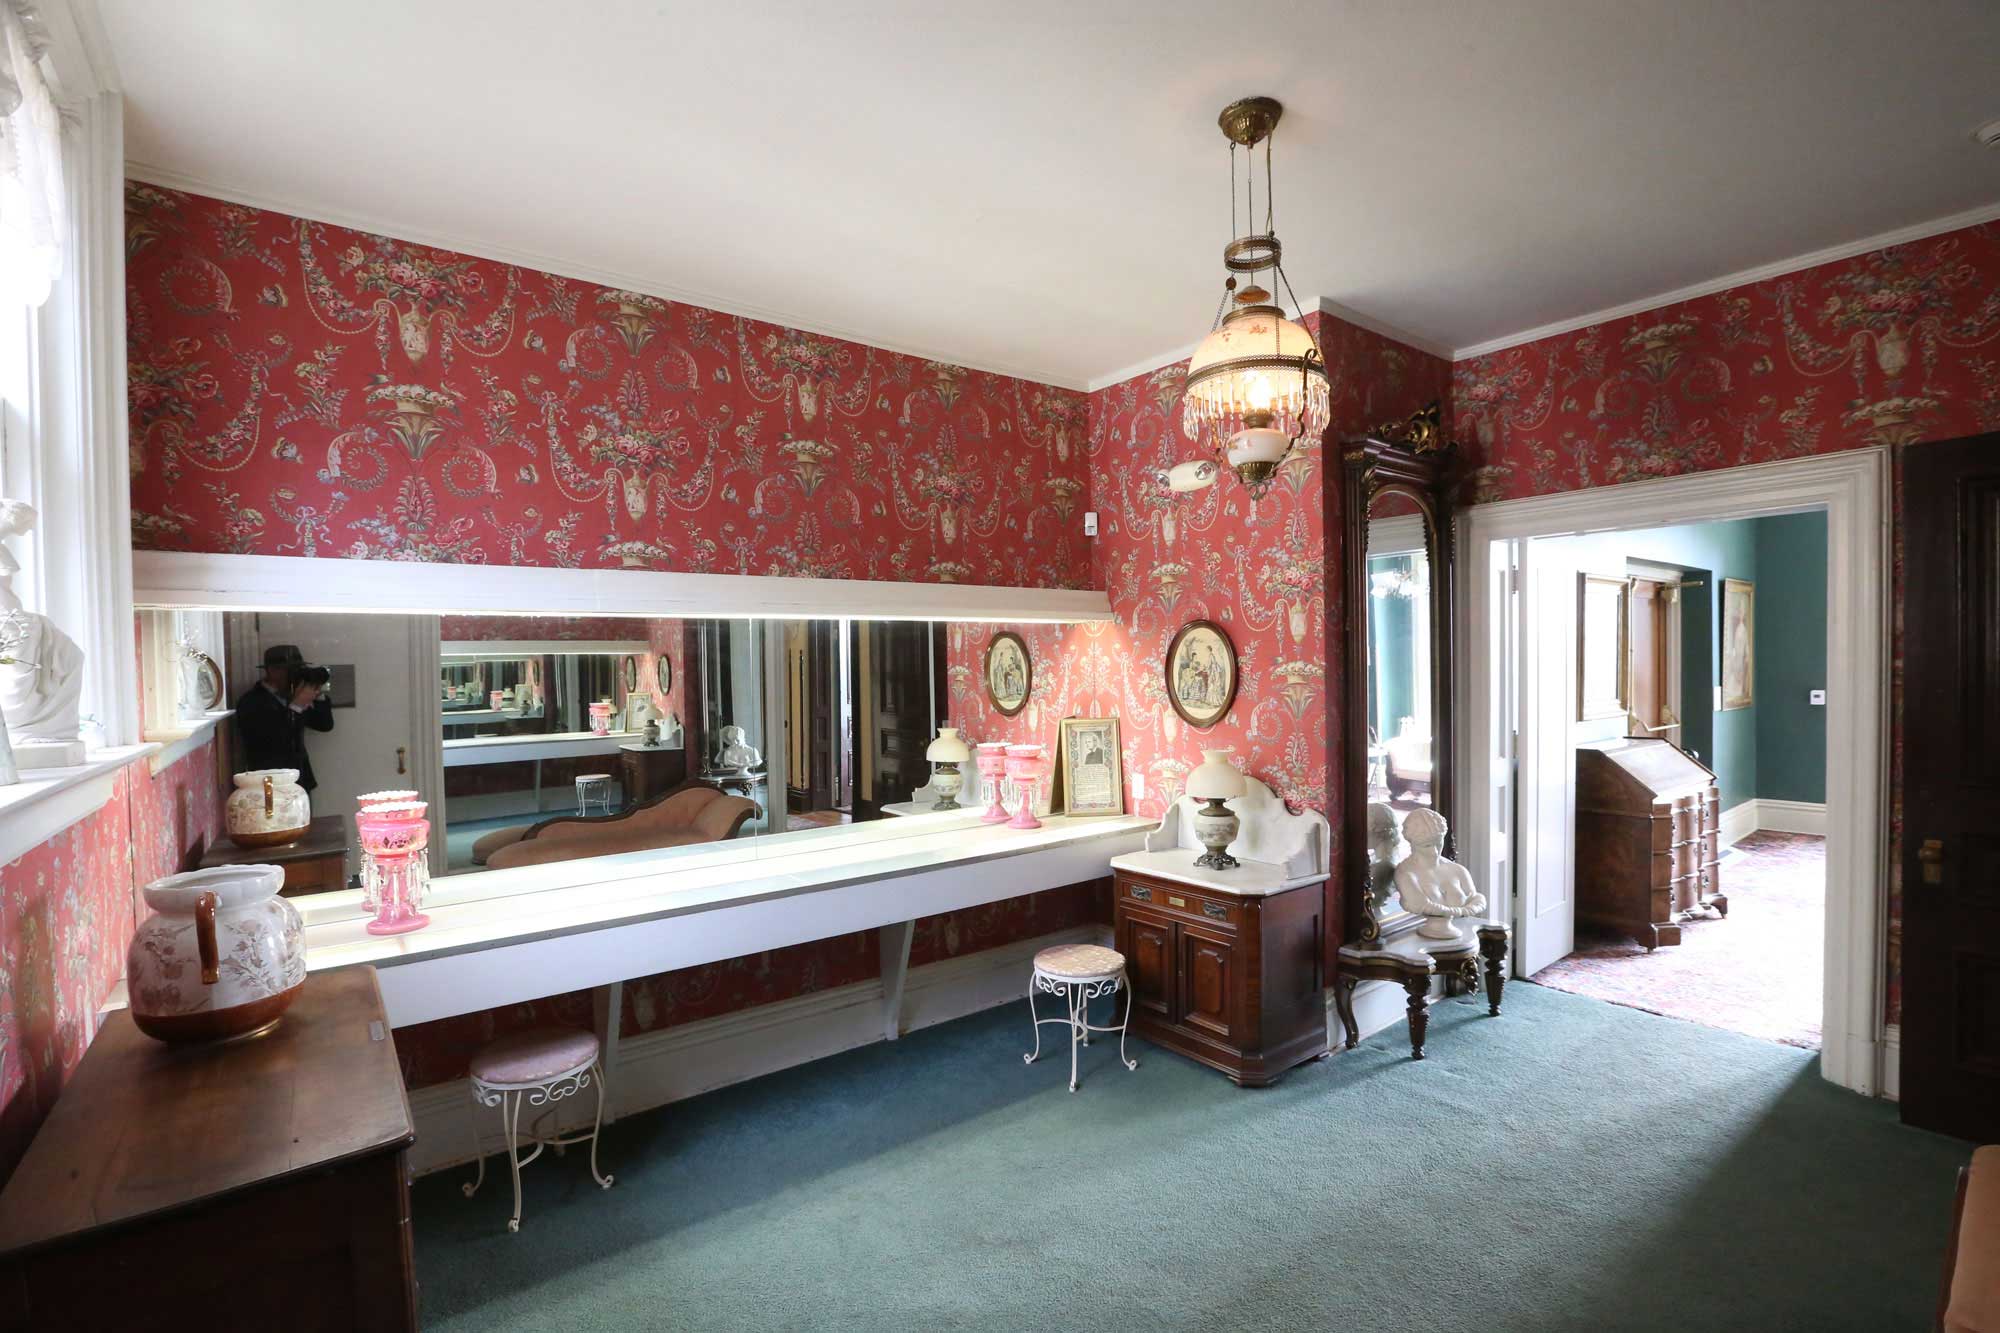 An interior of the ladies powder room with red floral wallpaper, a long mirrored shelf with seating, and a chandelier.